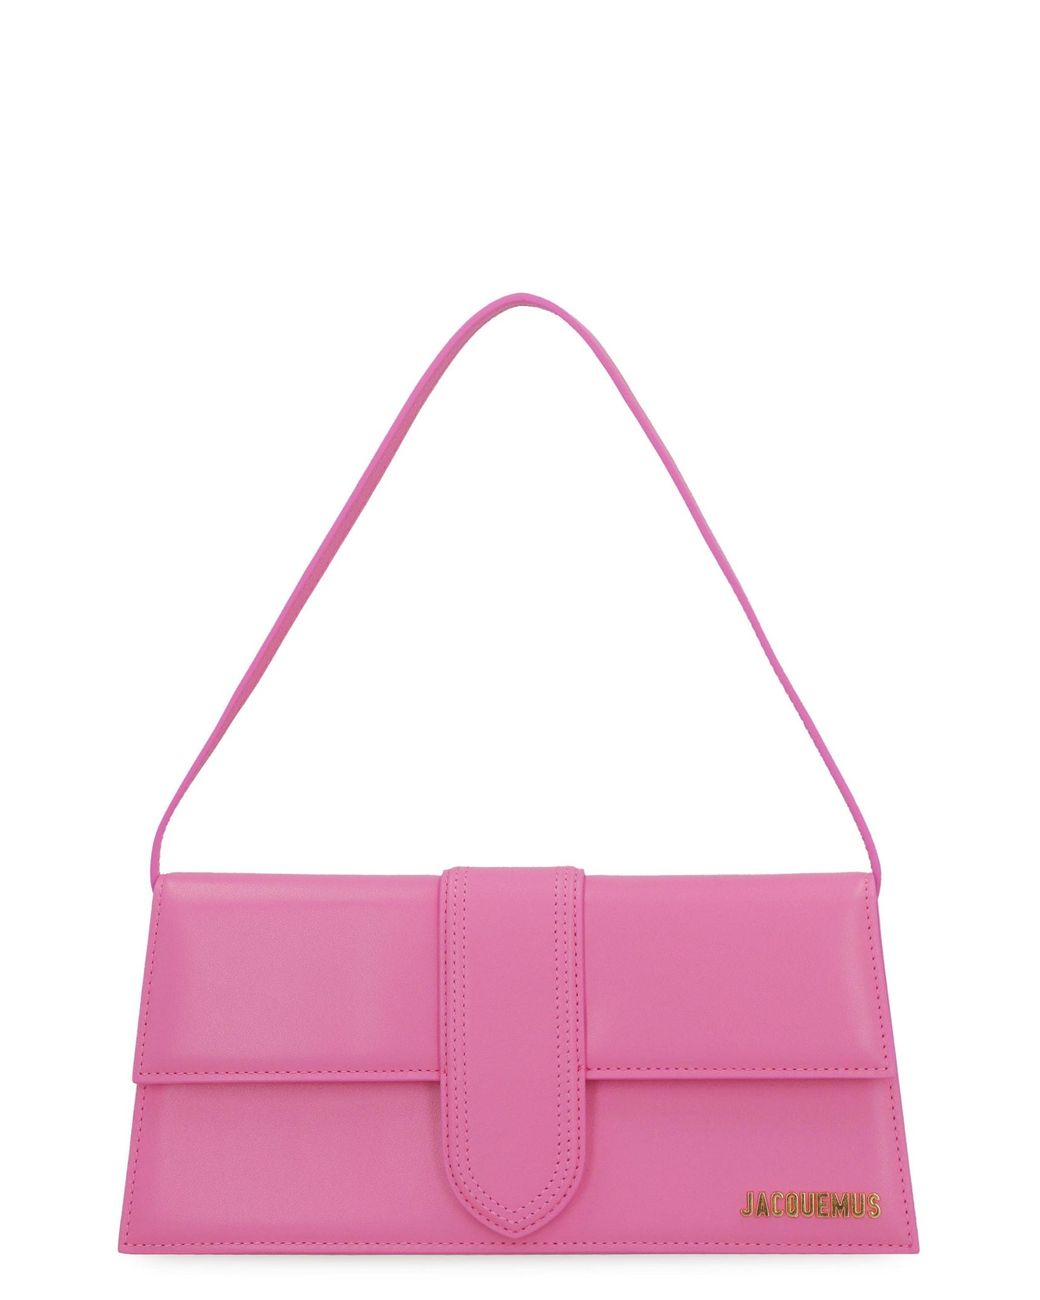 Jacquemus Le Bambino Long Leather Bag in Pink | Lyst